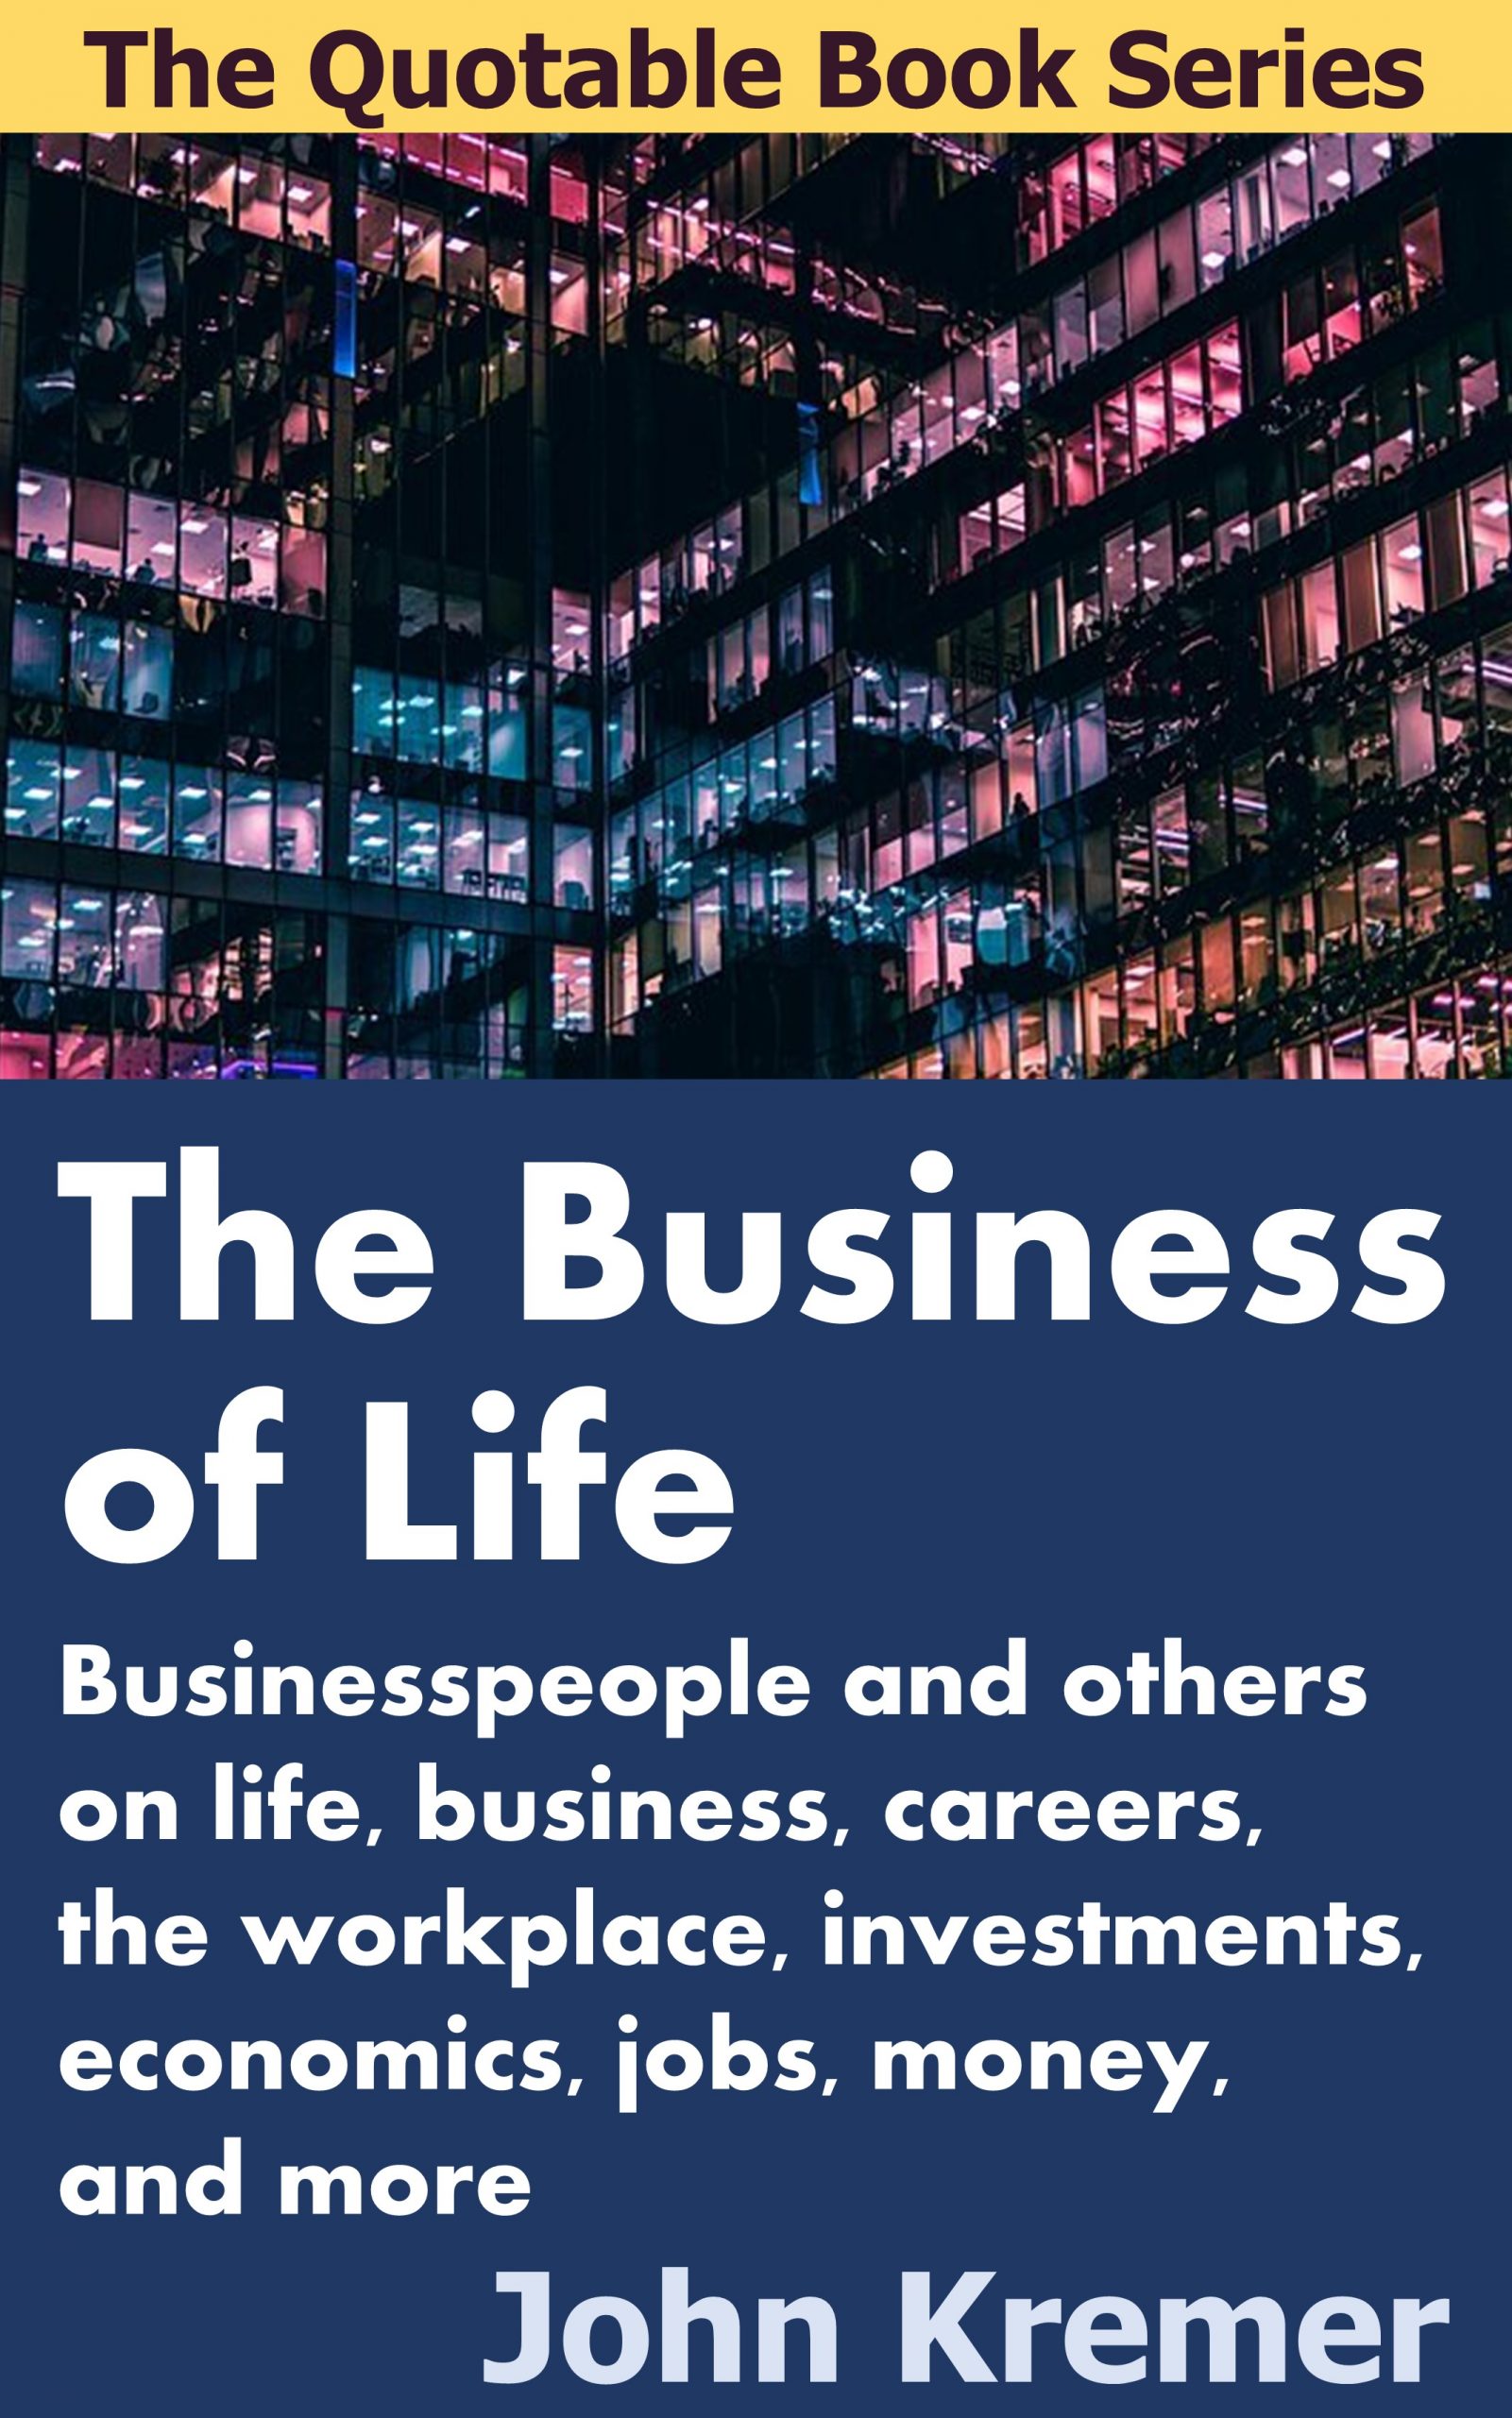 The Business of Life quotable book series